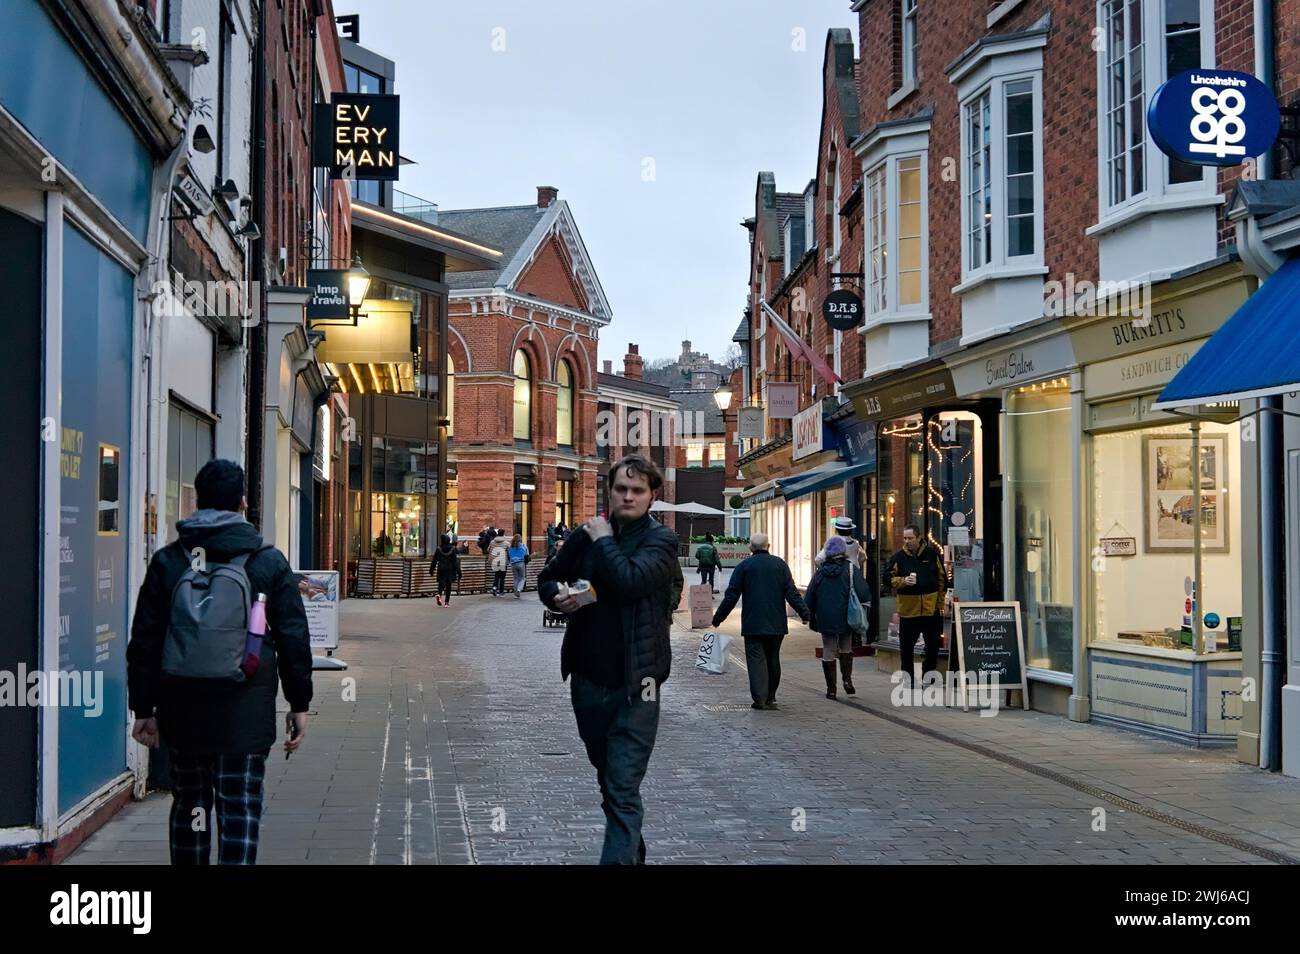 people walking by Lit-up shops near the Cornhill Quarter in Lincoln Stock Photo